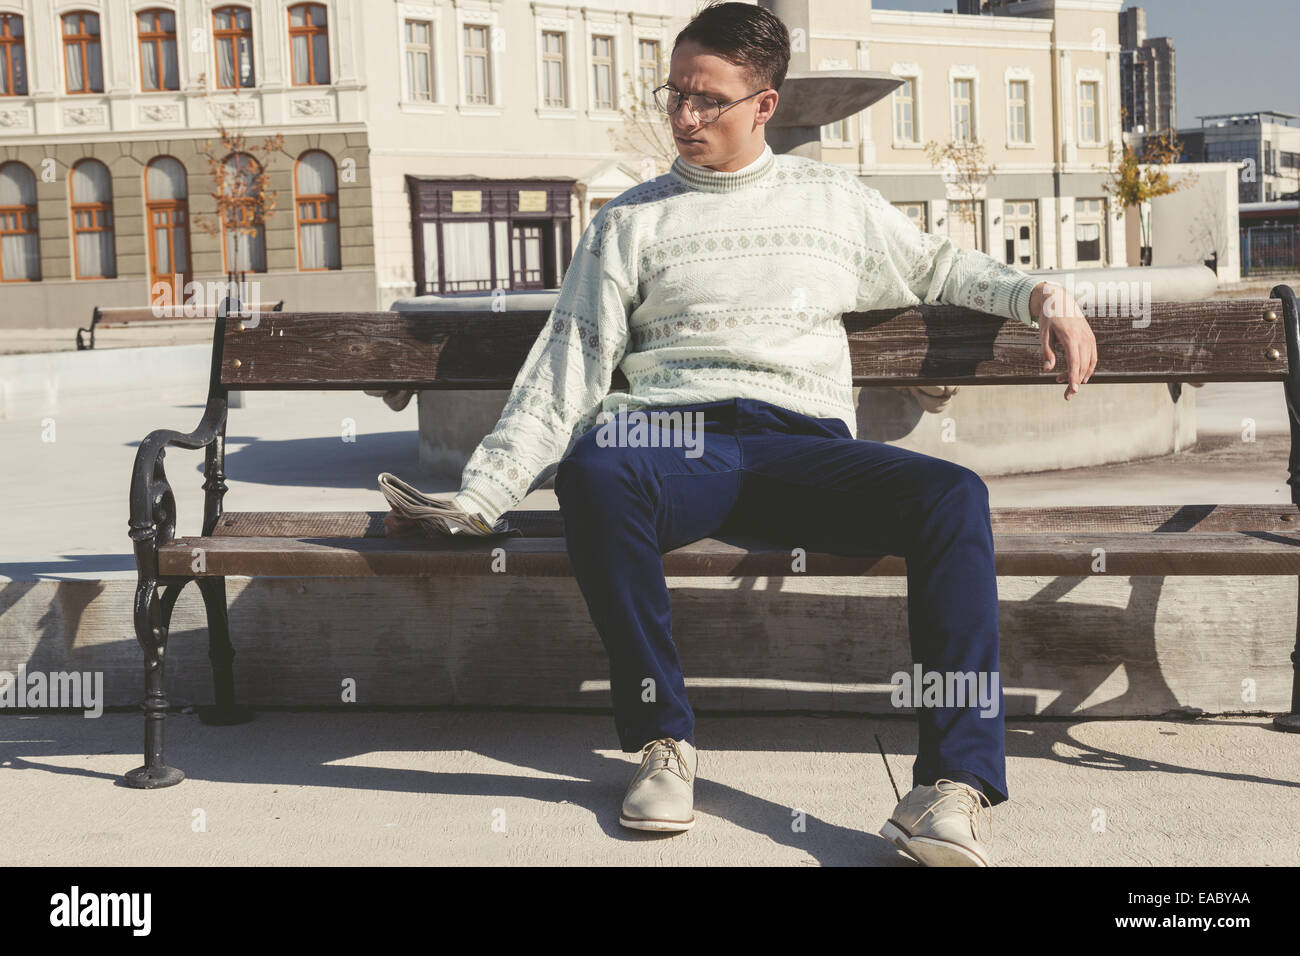 vintage photo of man with glasses in white sweater reading newspaper on bench next to fountain in town Stock Photo